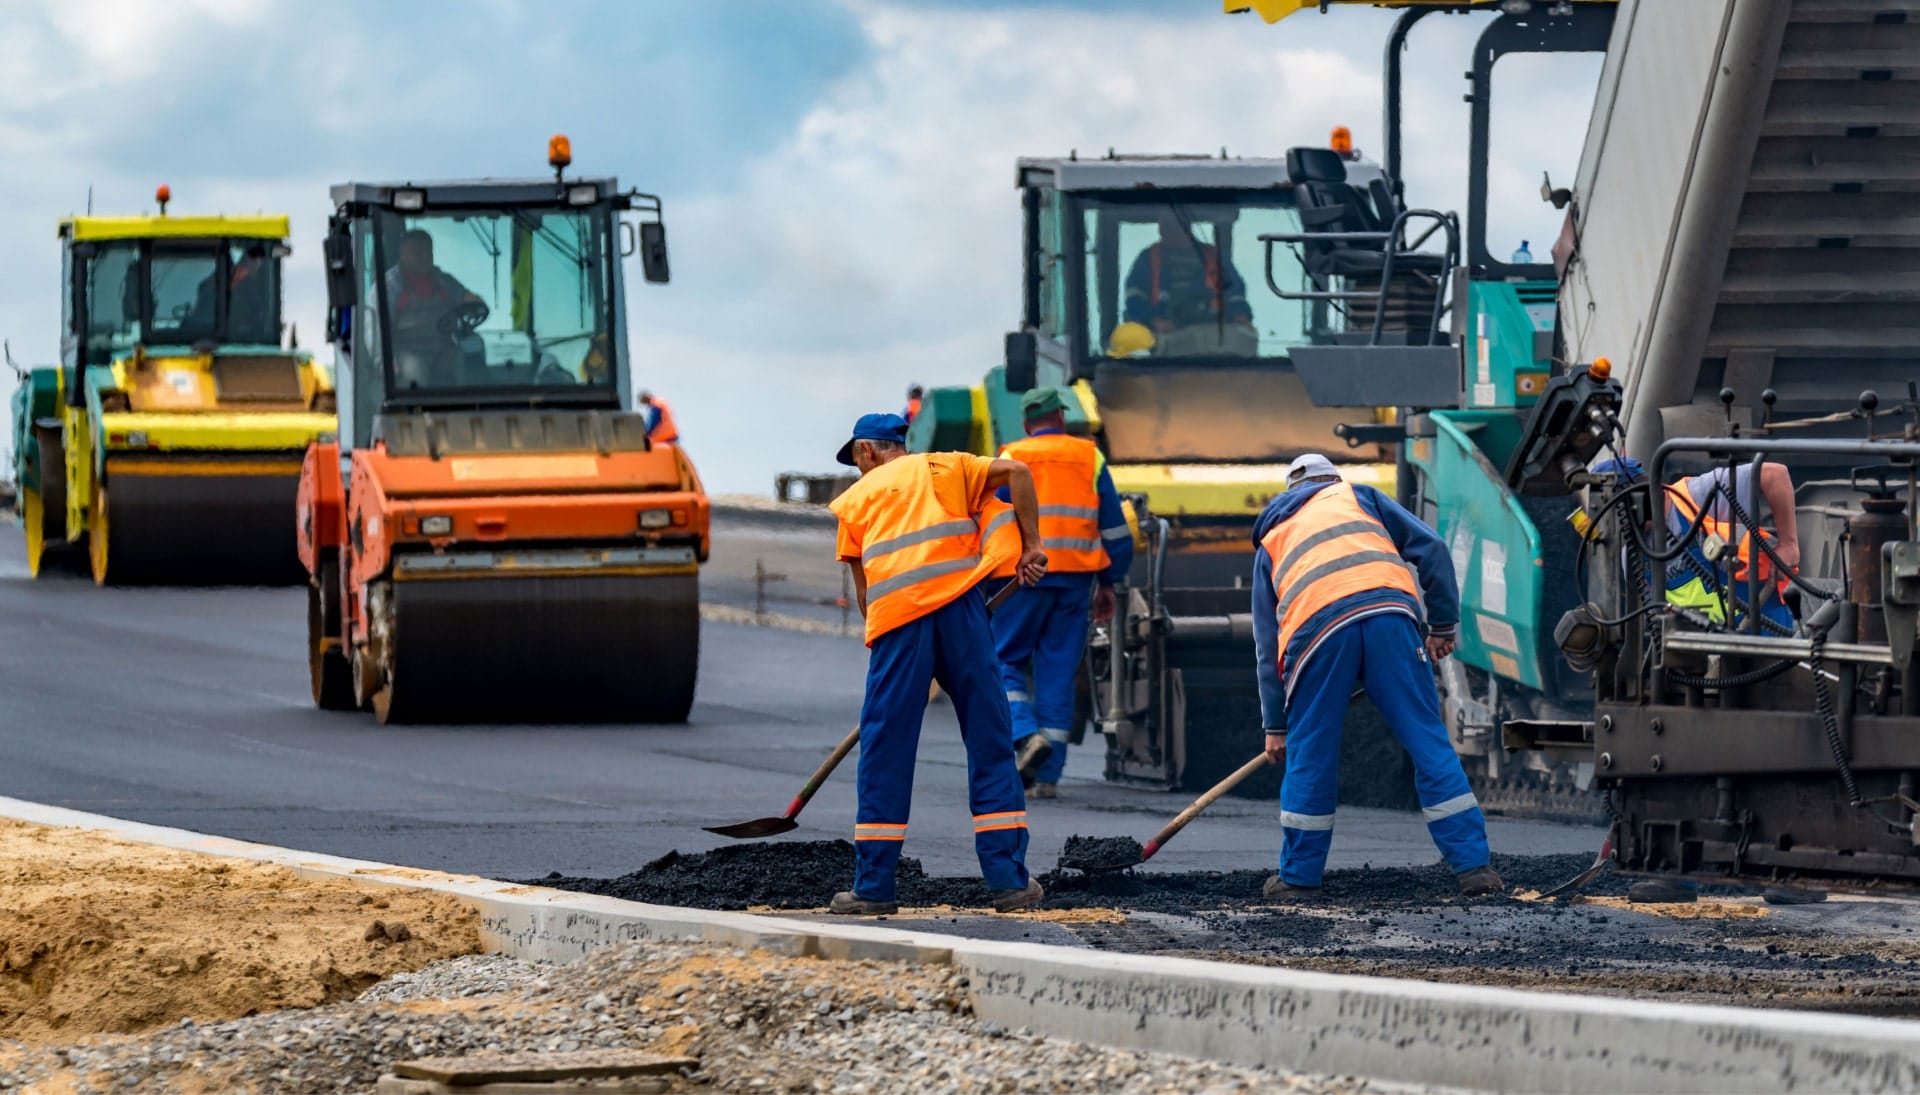 A group of construction workers wearing hard hats and reflective vests, operating heavy machinery and laying down asphalt on a newly excavated road in San Antonio, showcasing the intricate process of building a sturdy and smooth surface.